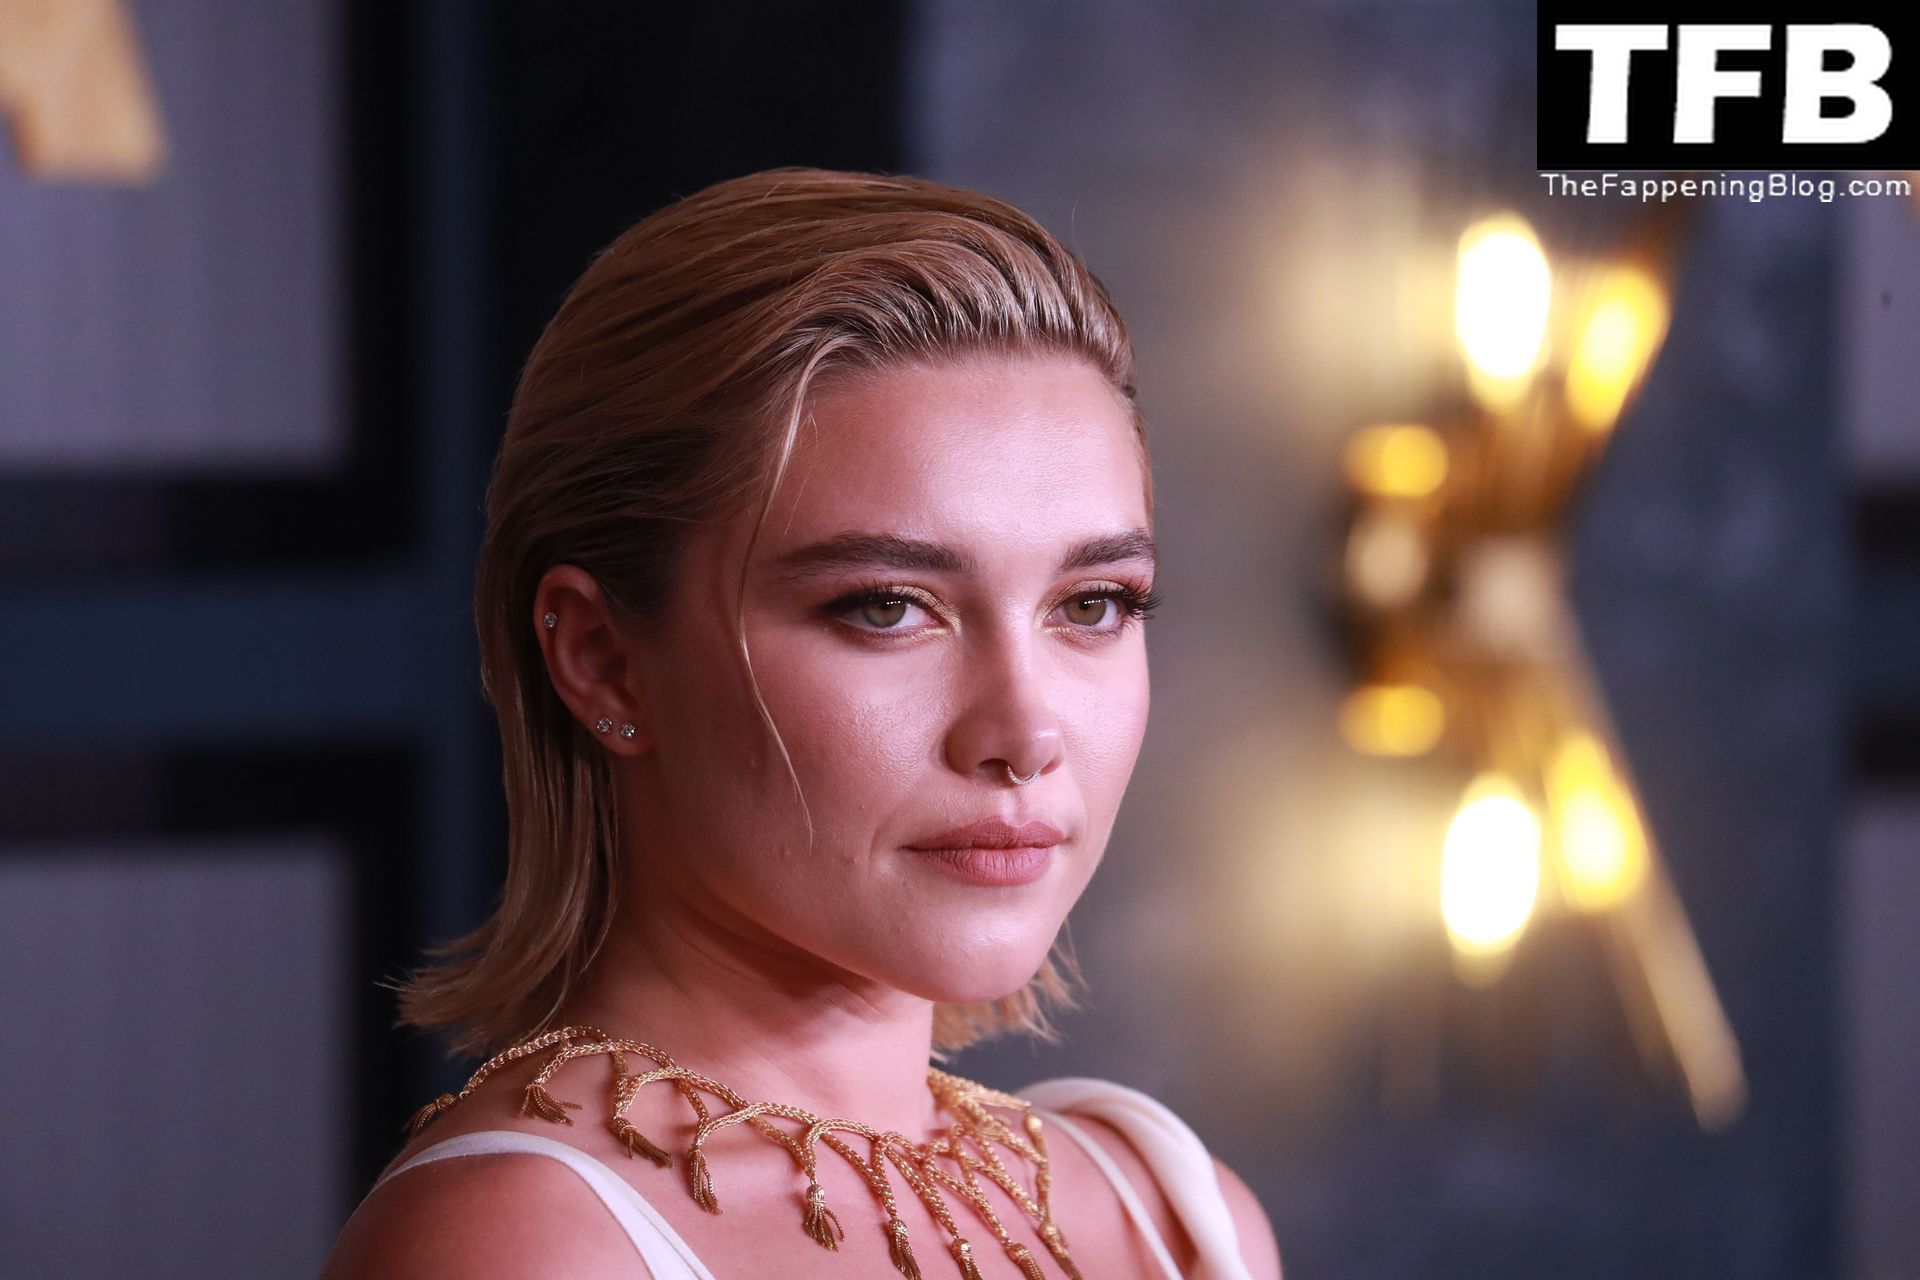 Florence-Pugh-Sexy-The-Fappening-Blog-37.jpg